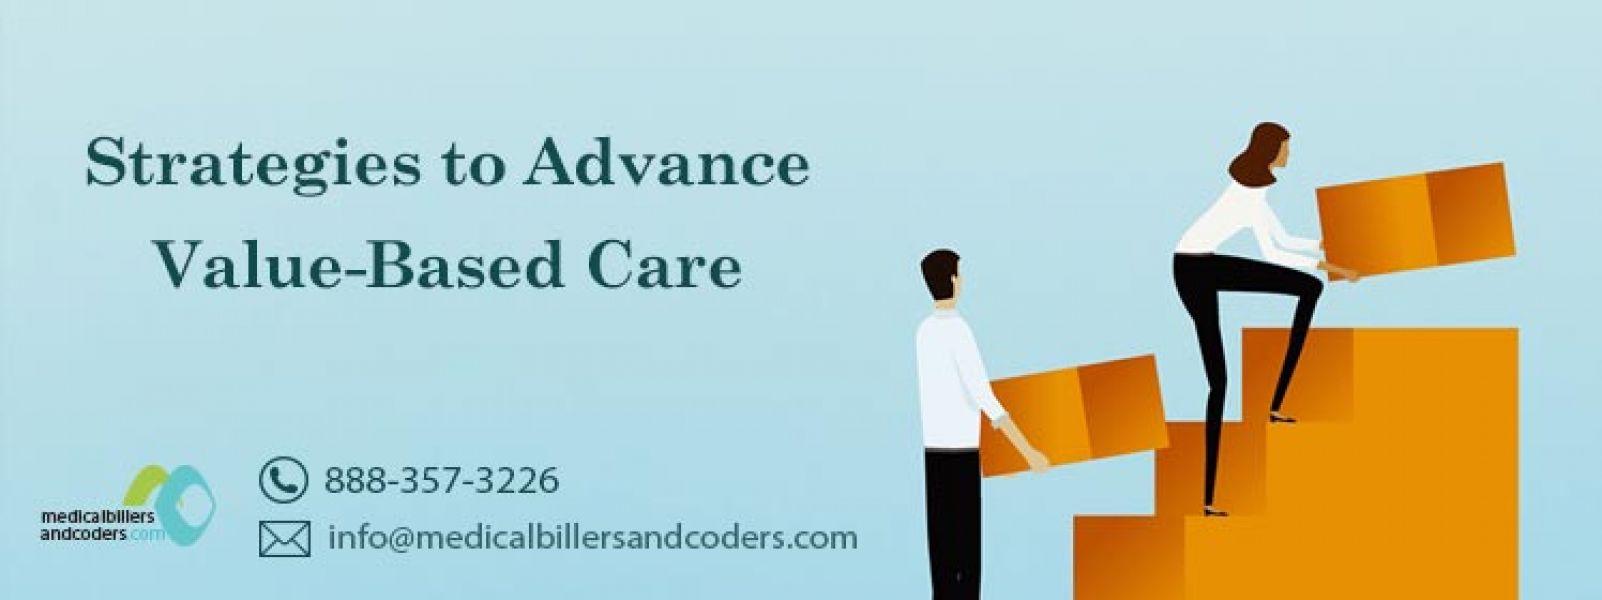 Strategies to Advance Value-Based Care